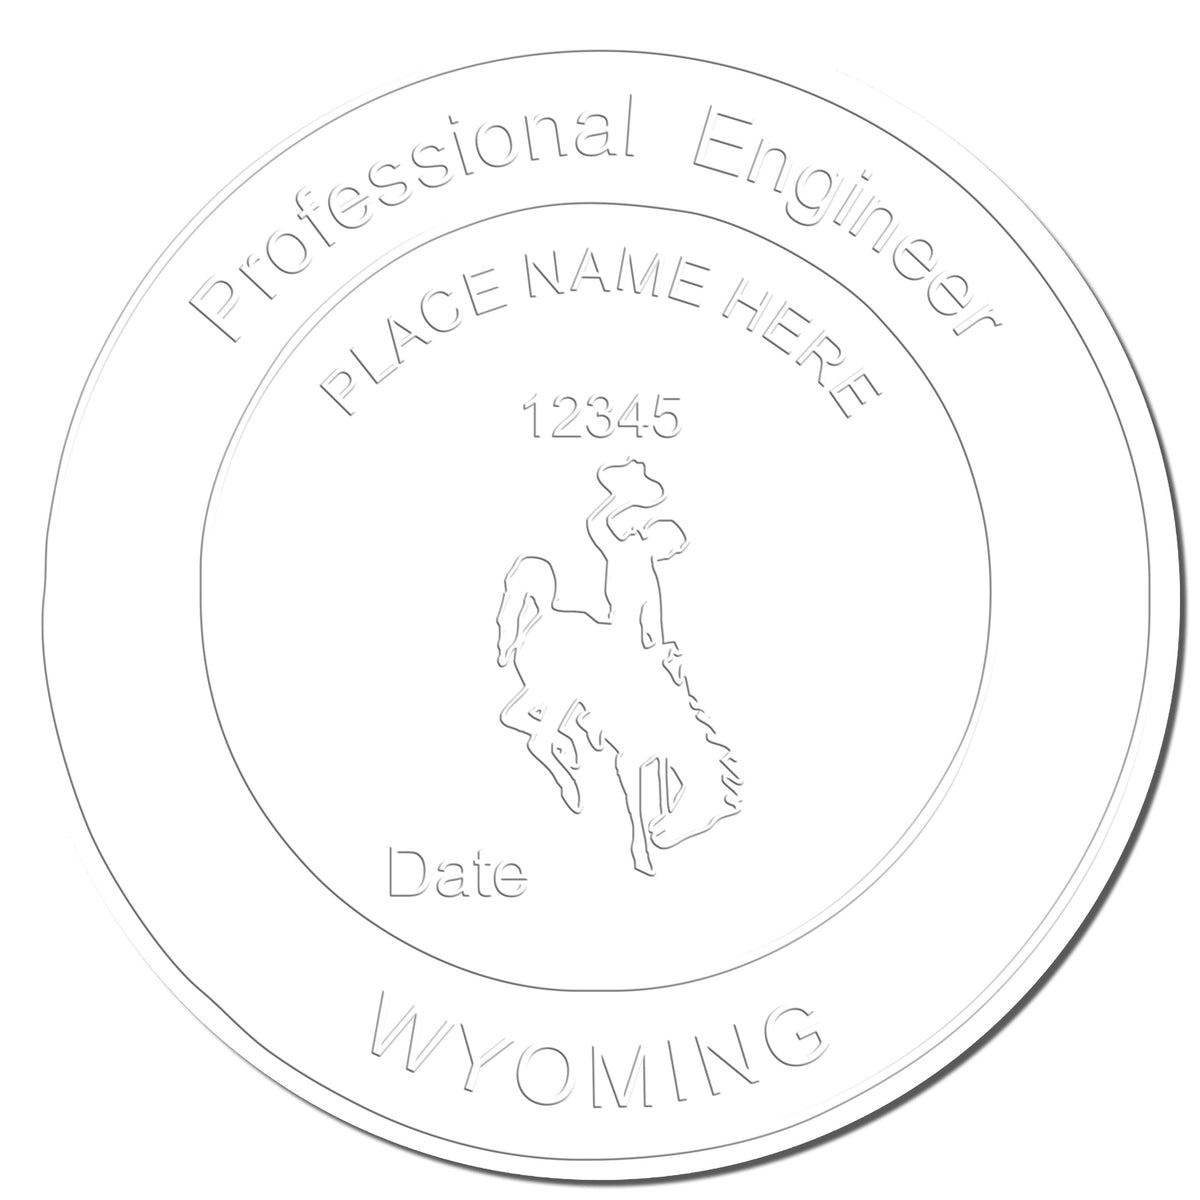 The Soft Wyoming Professional Engineer Seal stamp impression comes to life with a crisp, detailed photo on paper - showcasing true professional quality.